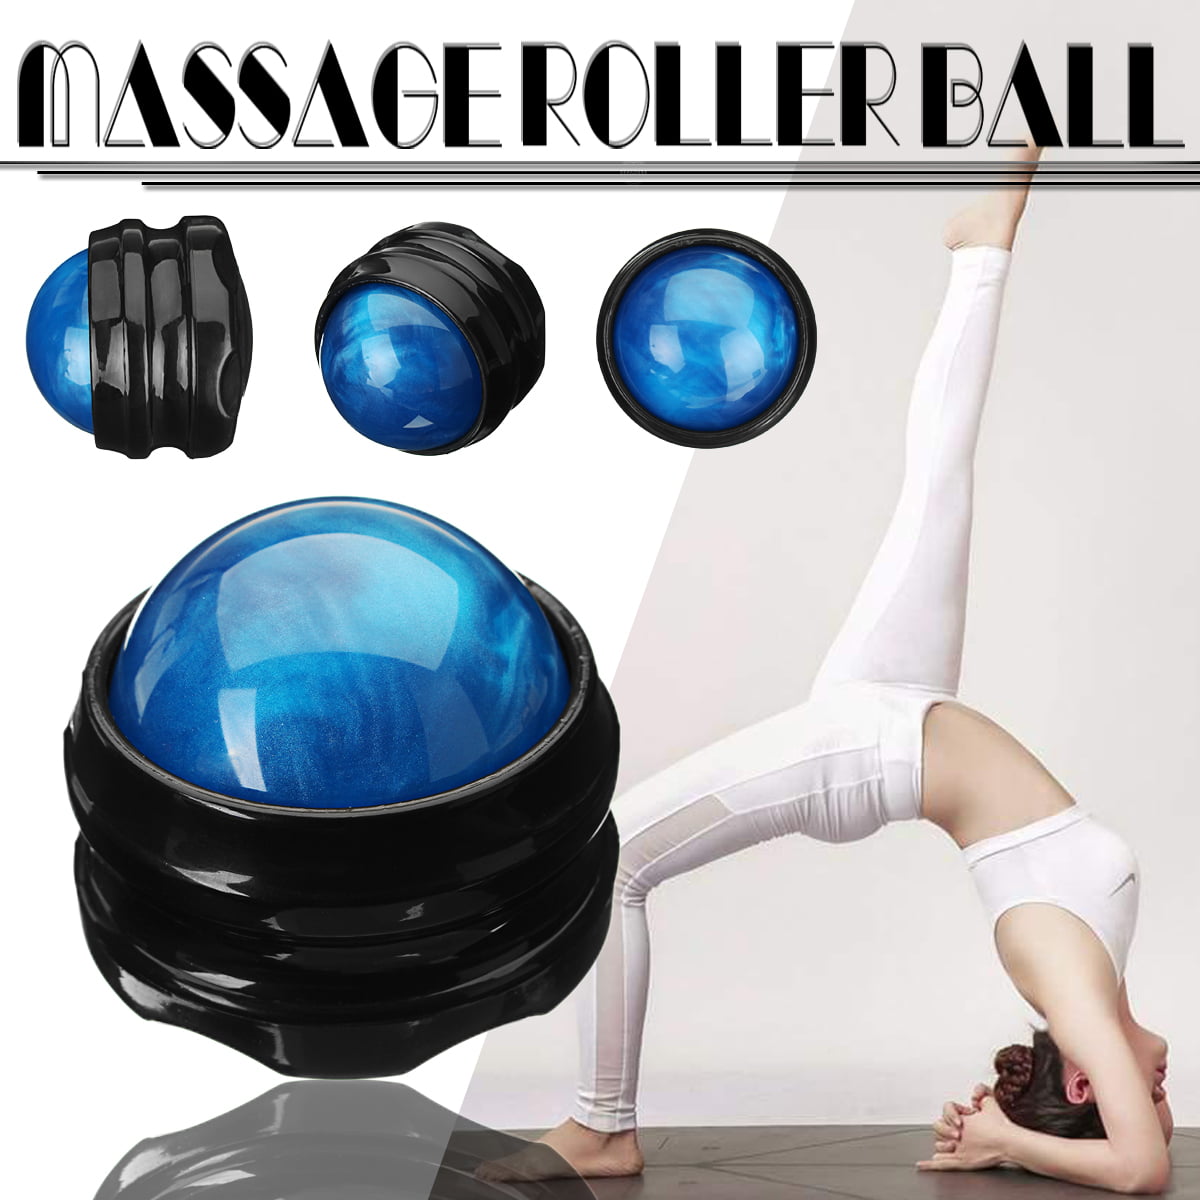 Massage Roller Ball Massager Body Therapy Foot Hip Back Relaxer Stress Release Walmart Canada